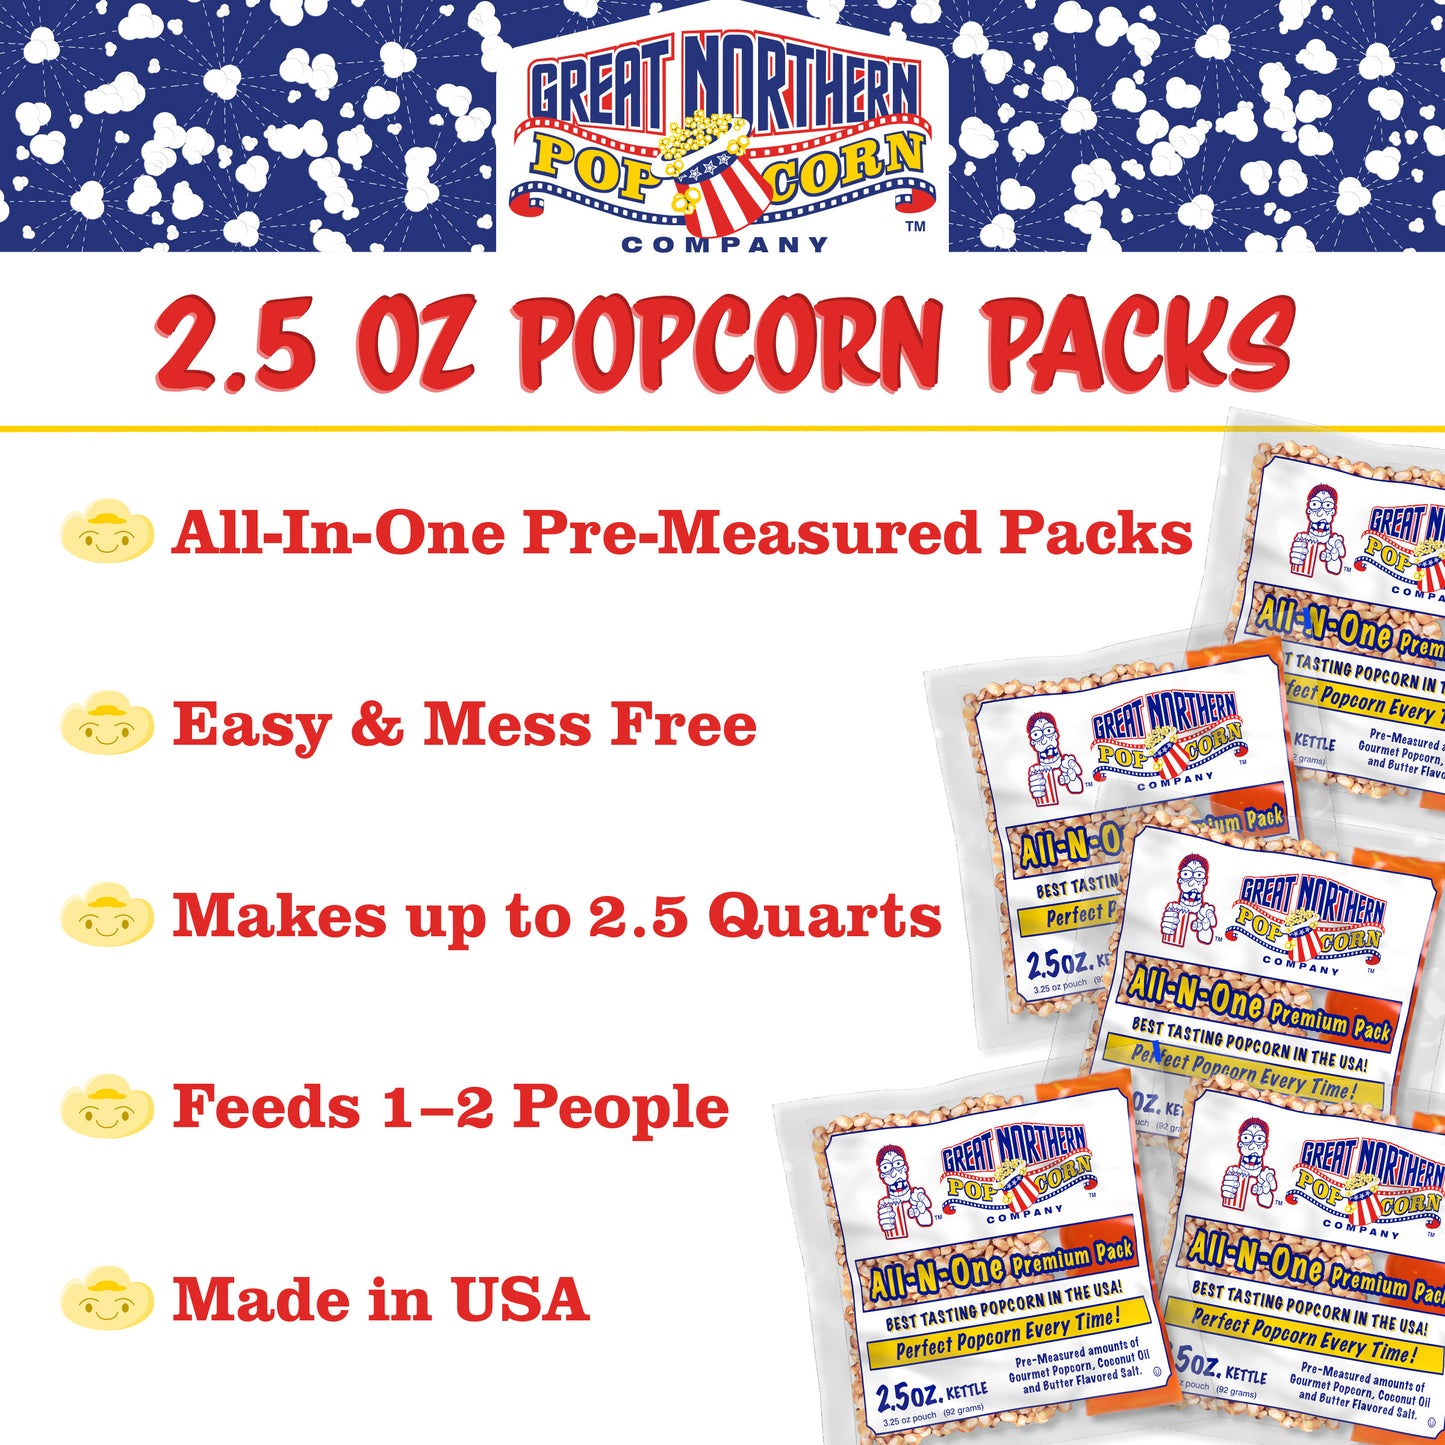 2.5 Ounce Popcorn, Salt and Oil All-in-One Packets - Case of 12